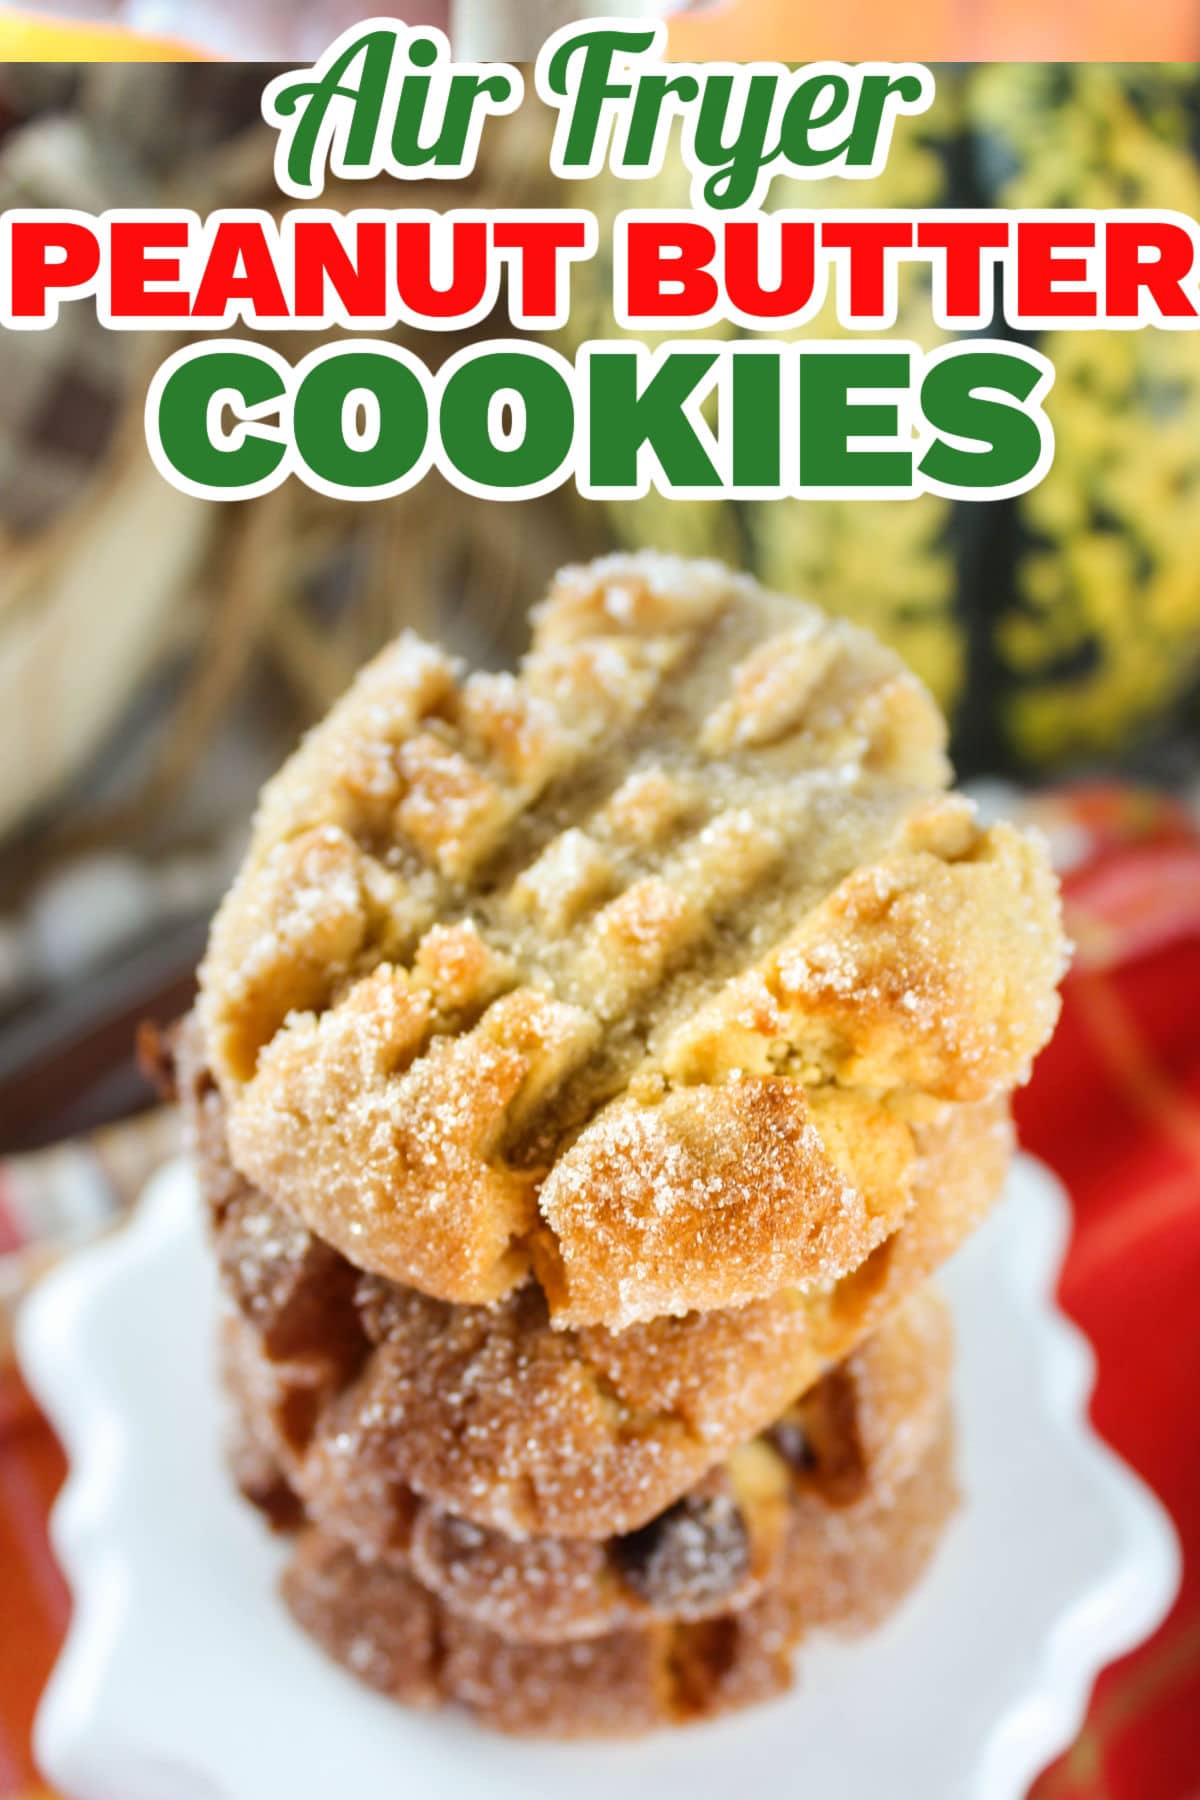 Air Fryer Peanut Butter Cookies take my favorite cookie and get it done even quicker! They're just as delicious as you'd think! Peanut butter cookies have always been my favorite - and I doubled up the peanut butter - and don't forget to roll them in sugar! That was my Grandma's final touch! via @foodhussy